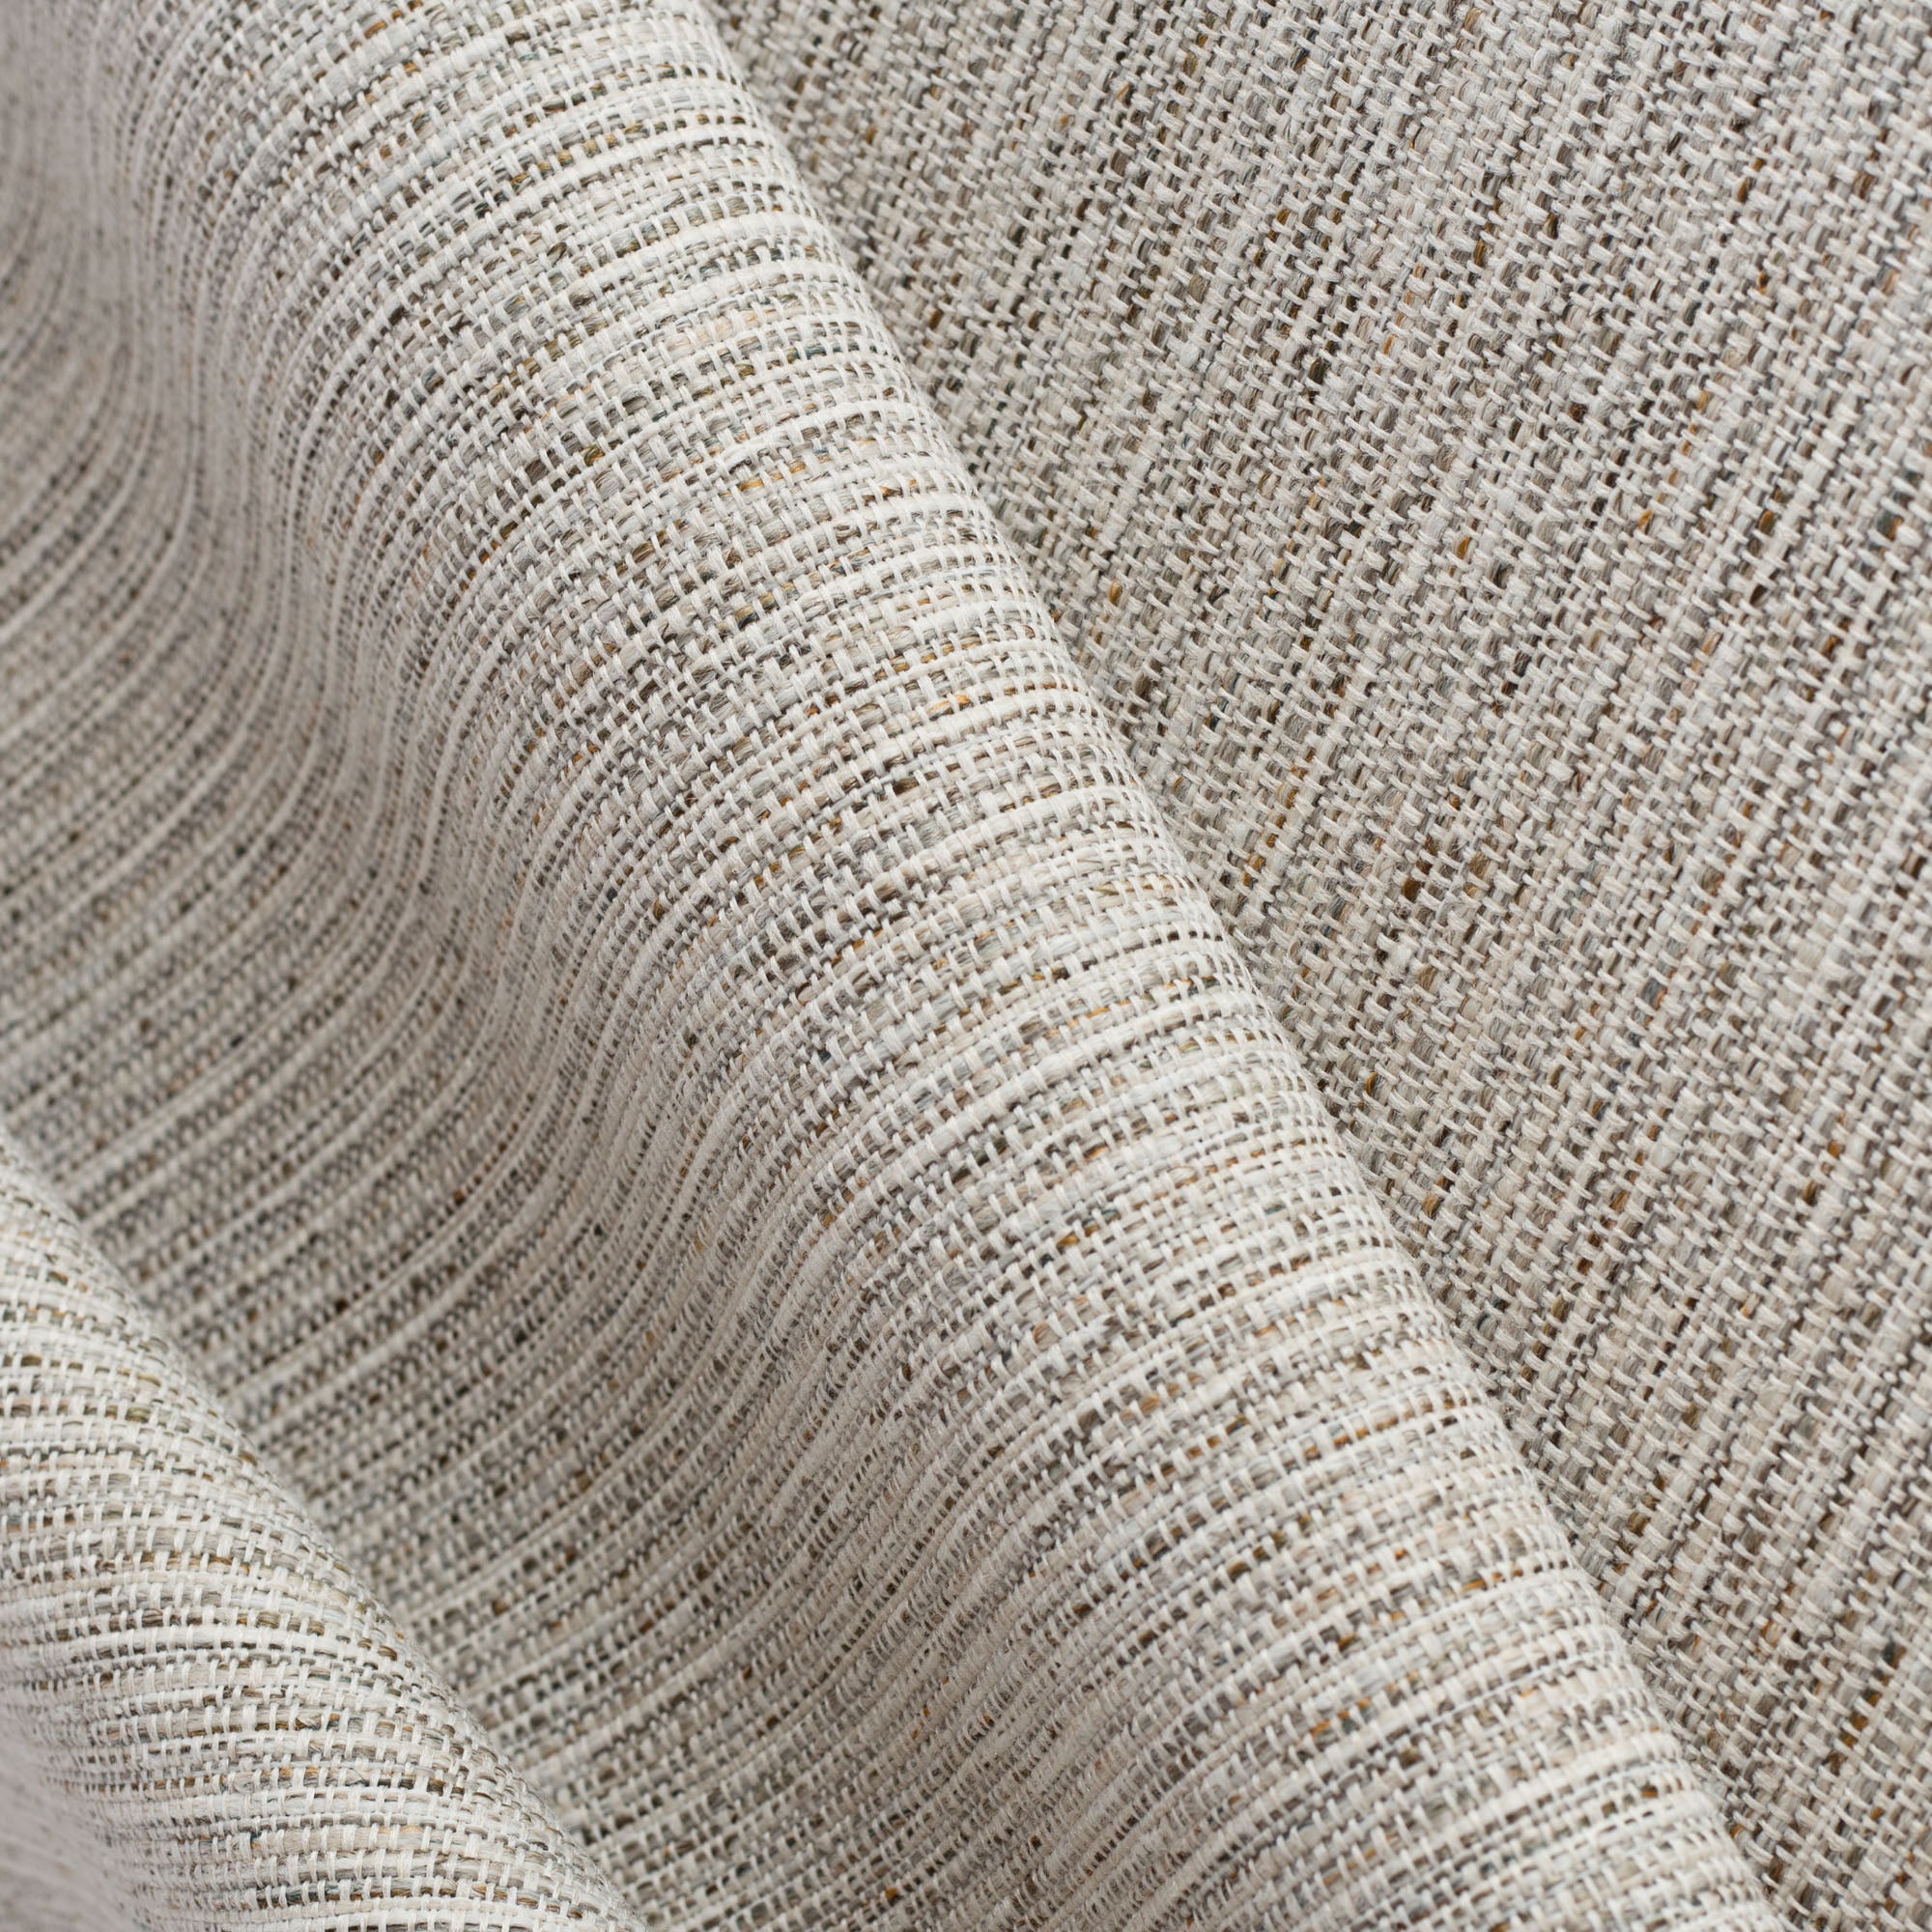 Arthur Tweed, a warm gray performance fabric from Tonic Living